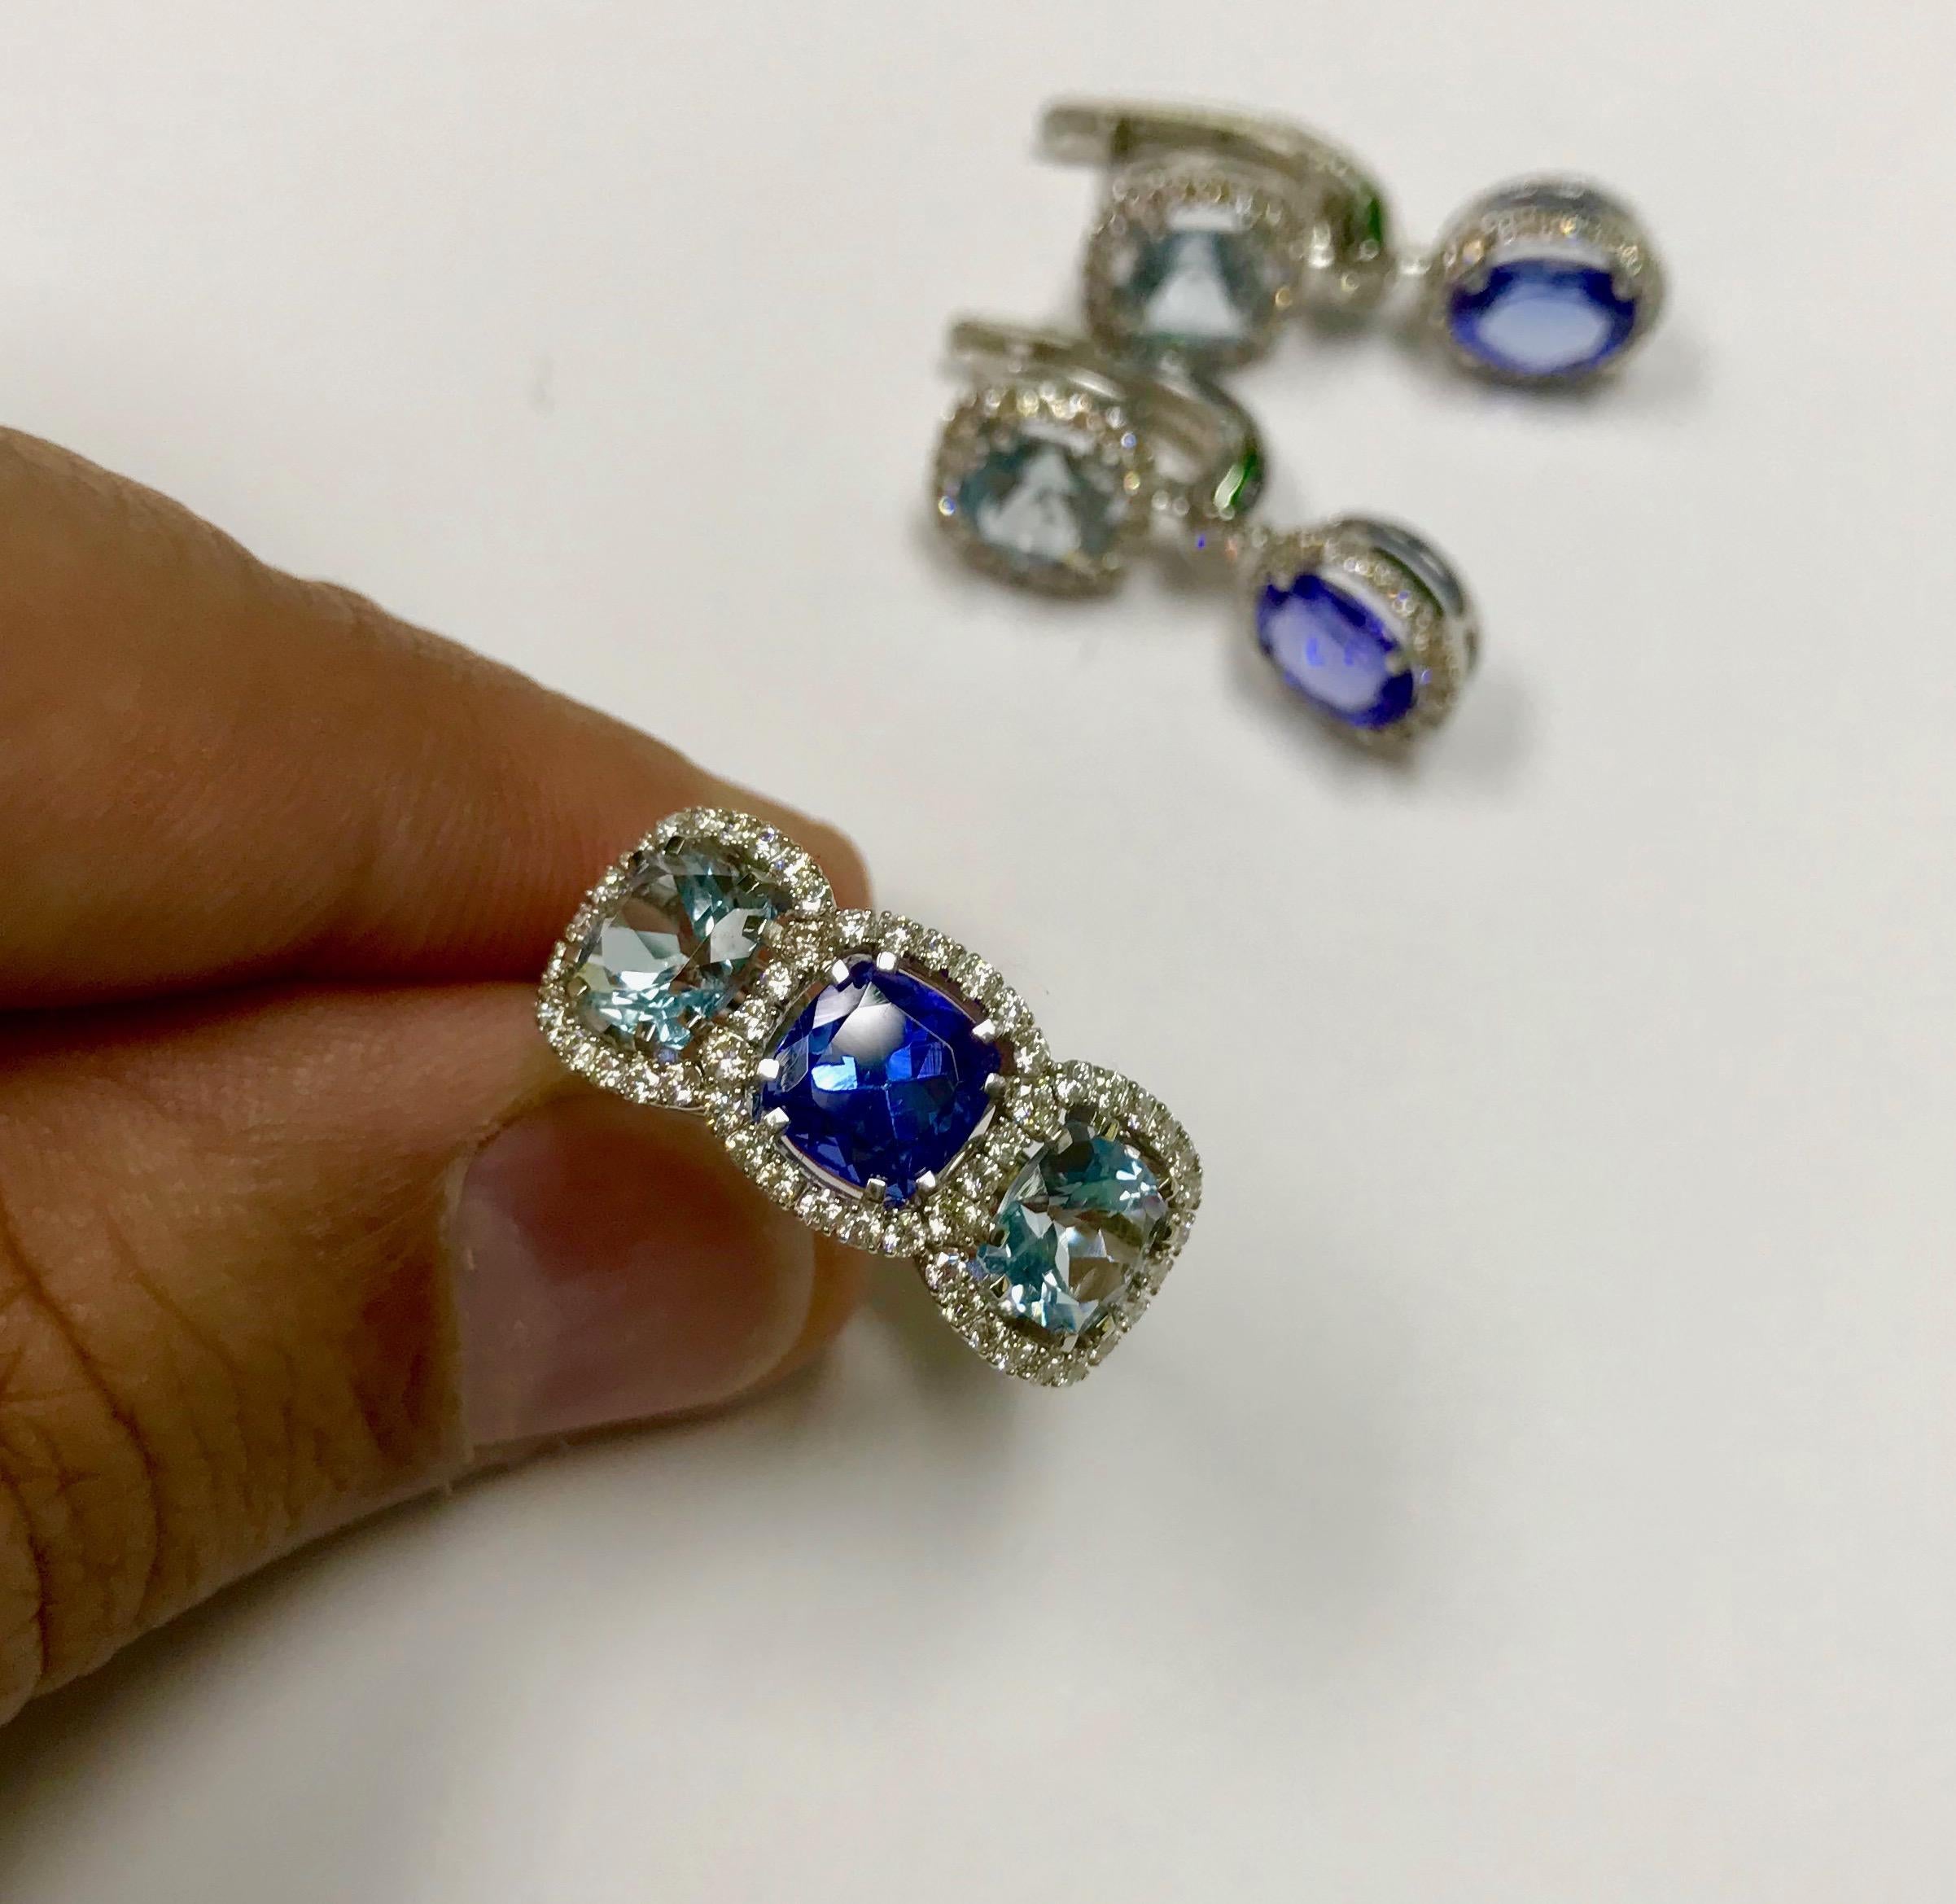 Classical Three-Stone ring with Tanzanite 1.48 carat, Aquamarine 1,96 carat and Diamonds 0,67 carat. 18 Karat White Gold Ring
Available in set with earrings LU116414714261

US Size  7 3/4
EU Size 55 7/8

10x24.5 mm
6.85 gm
